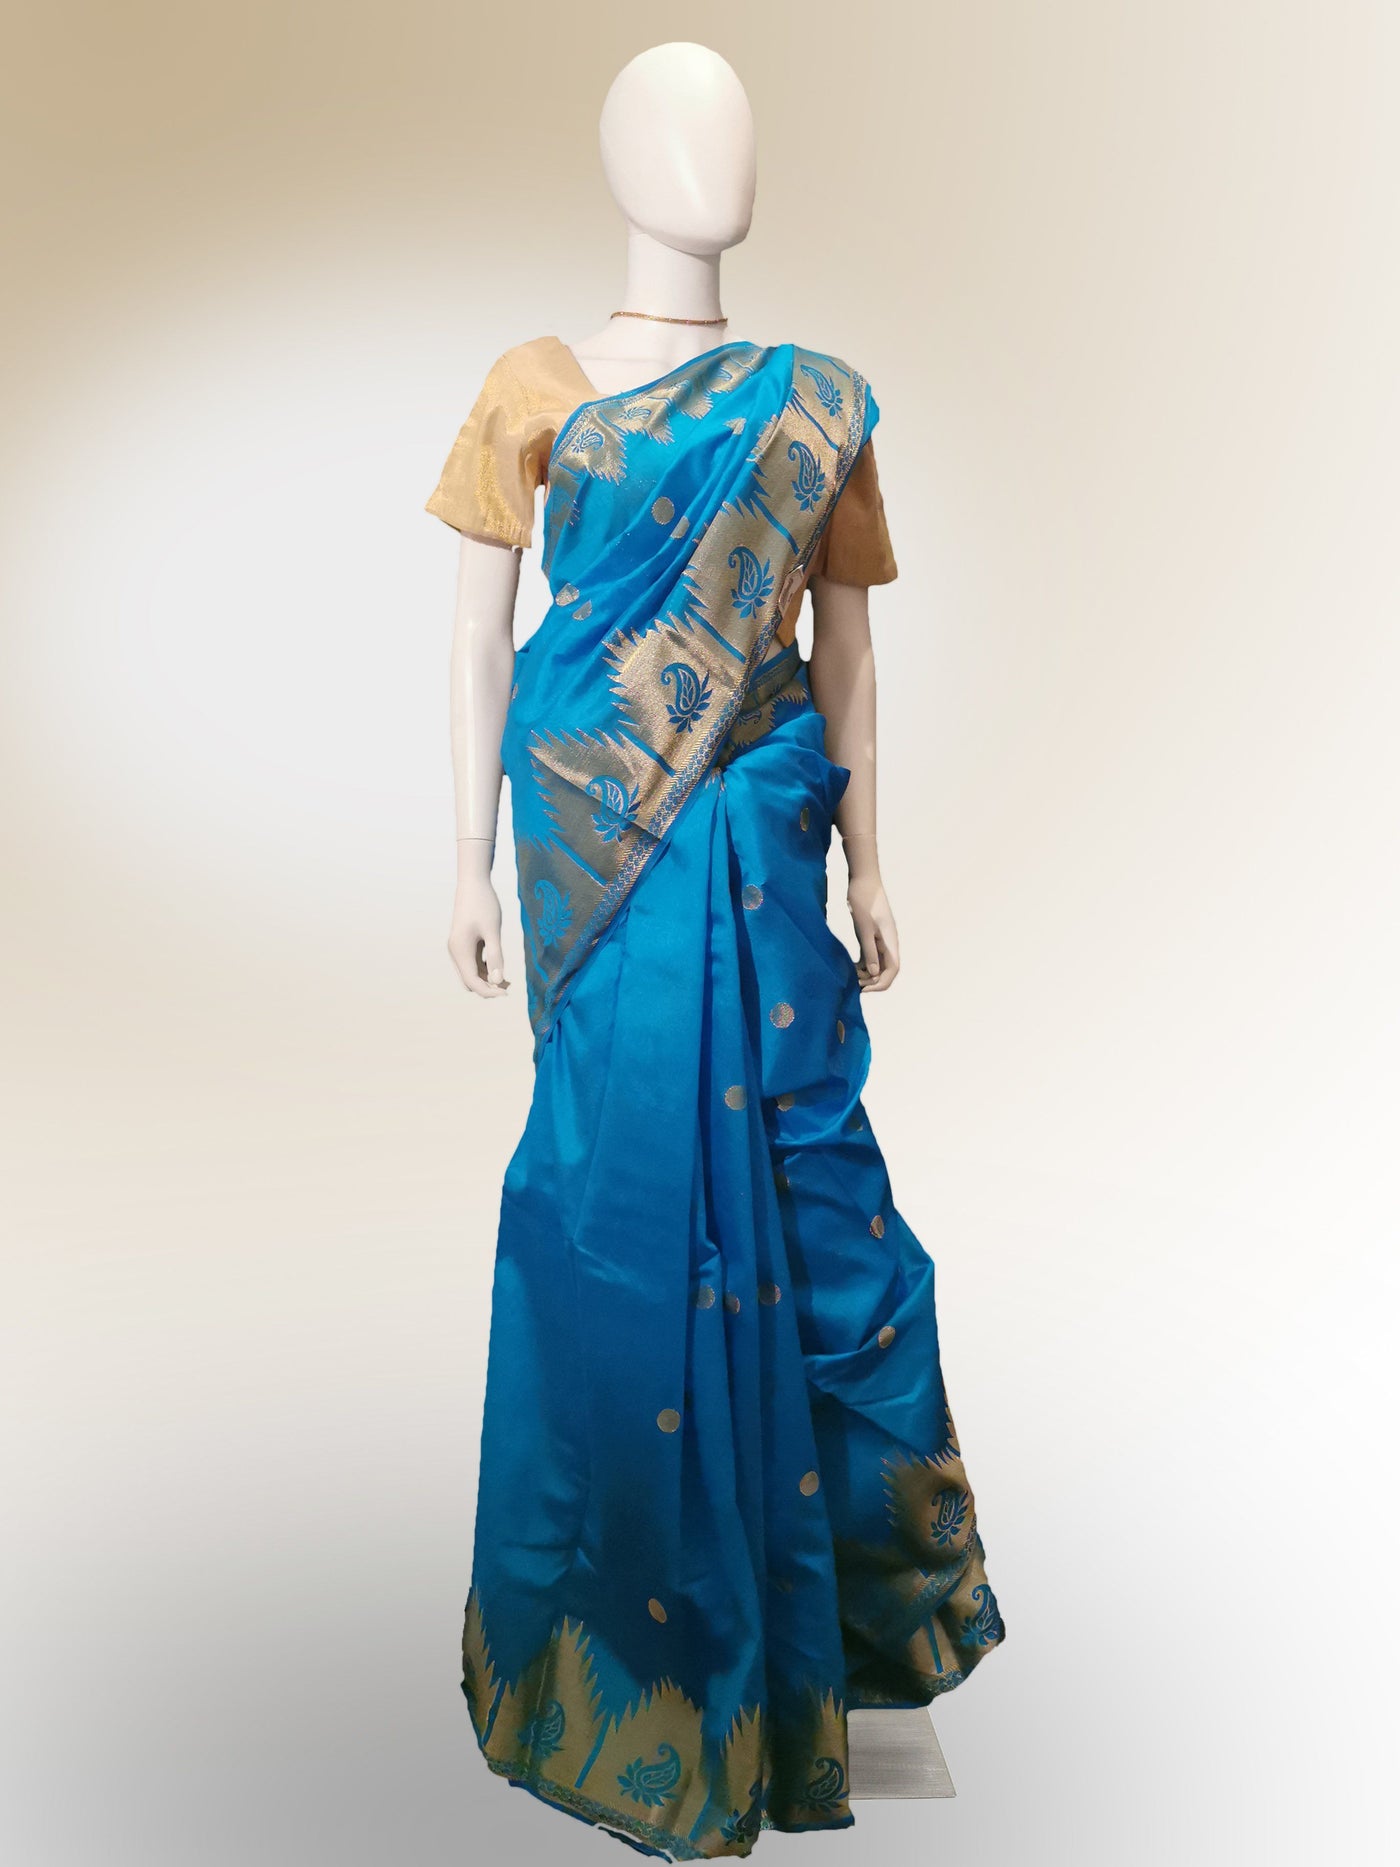 Vibrant Blue Saree Indian Clothing in Denver, CO, Aurora, CO, Boulder, CO, Fort Collins, CO, Colorado Springs, CO, Parker, CO, Highlands Ranch, CO, Cherry Creek, CO, Centennial, CO, and Longmont, CO. NATIONWIDE SHIPPING USA- India Fashion X